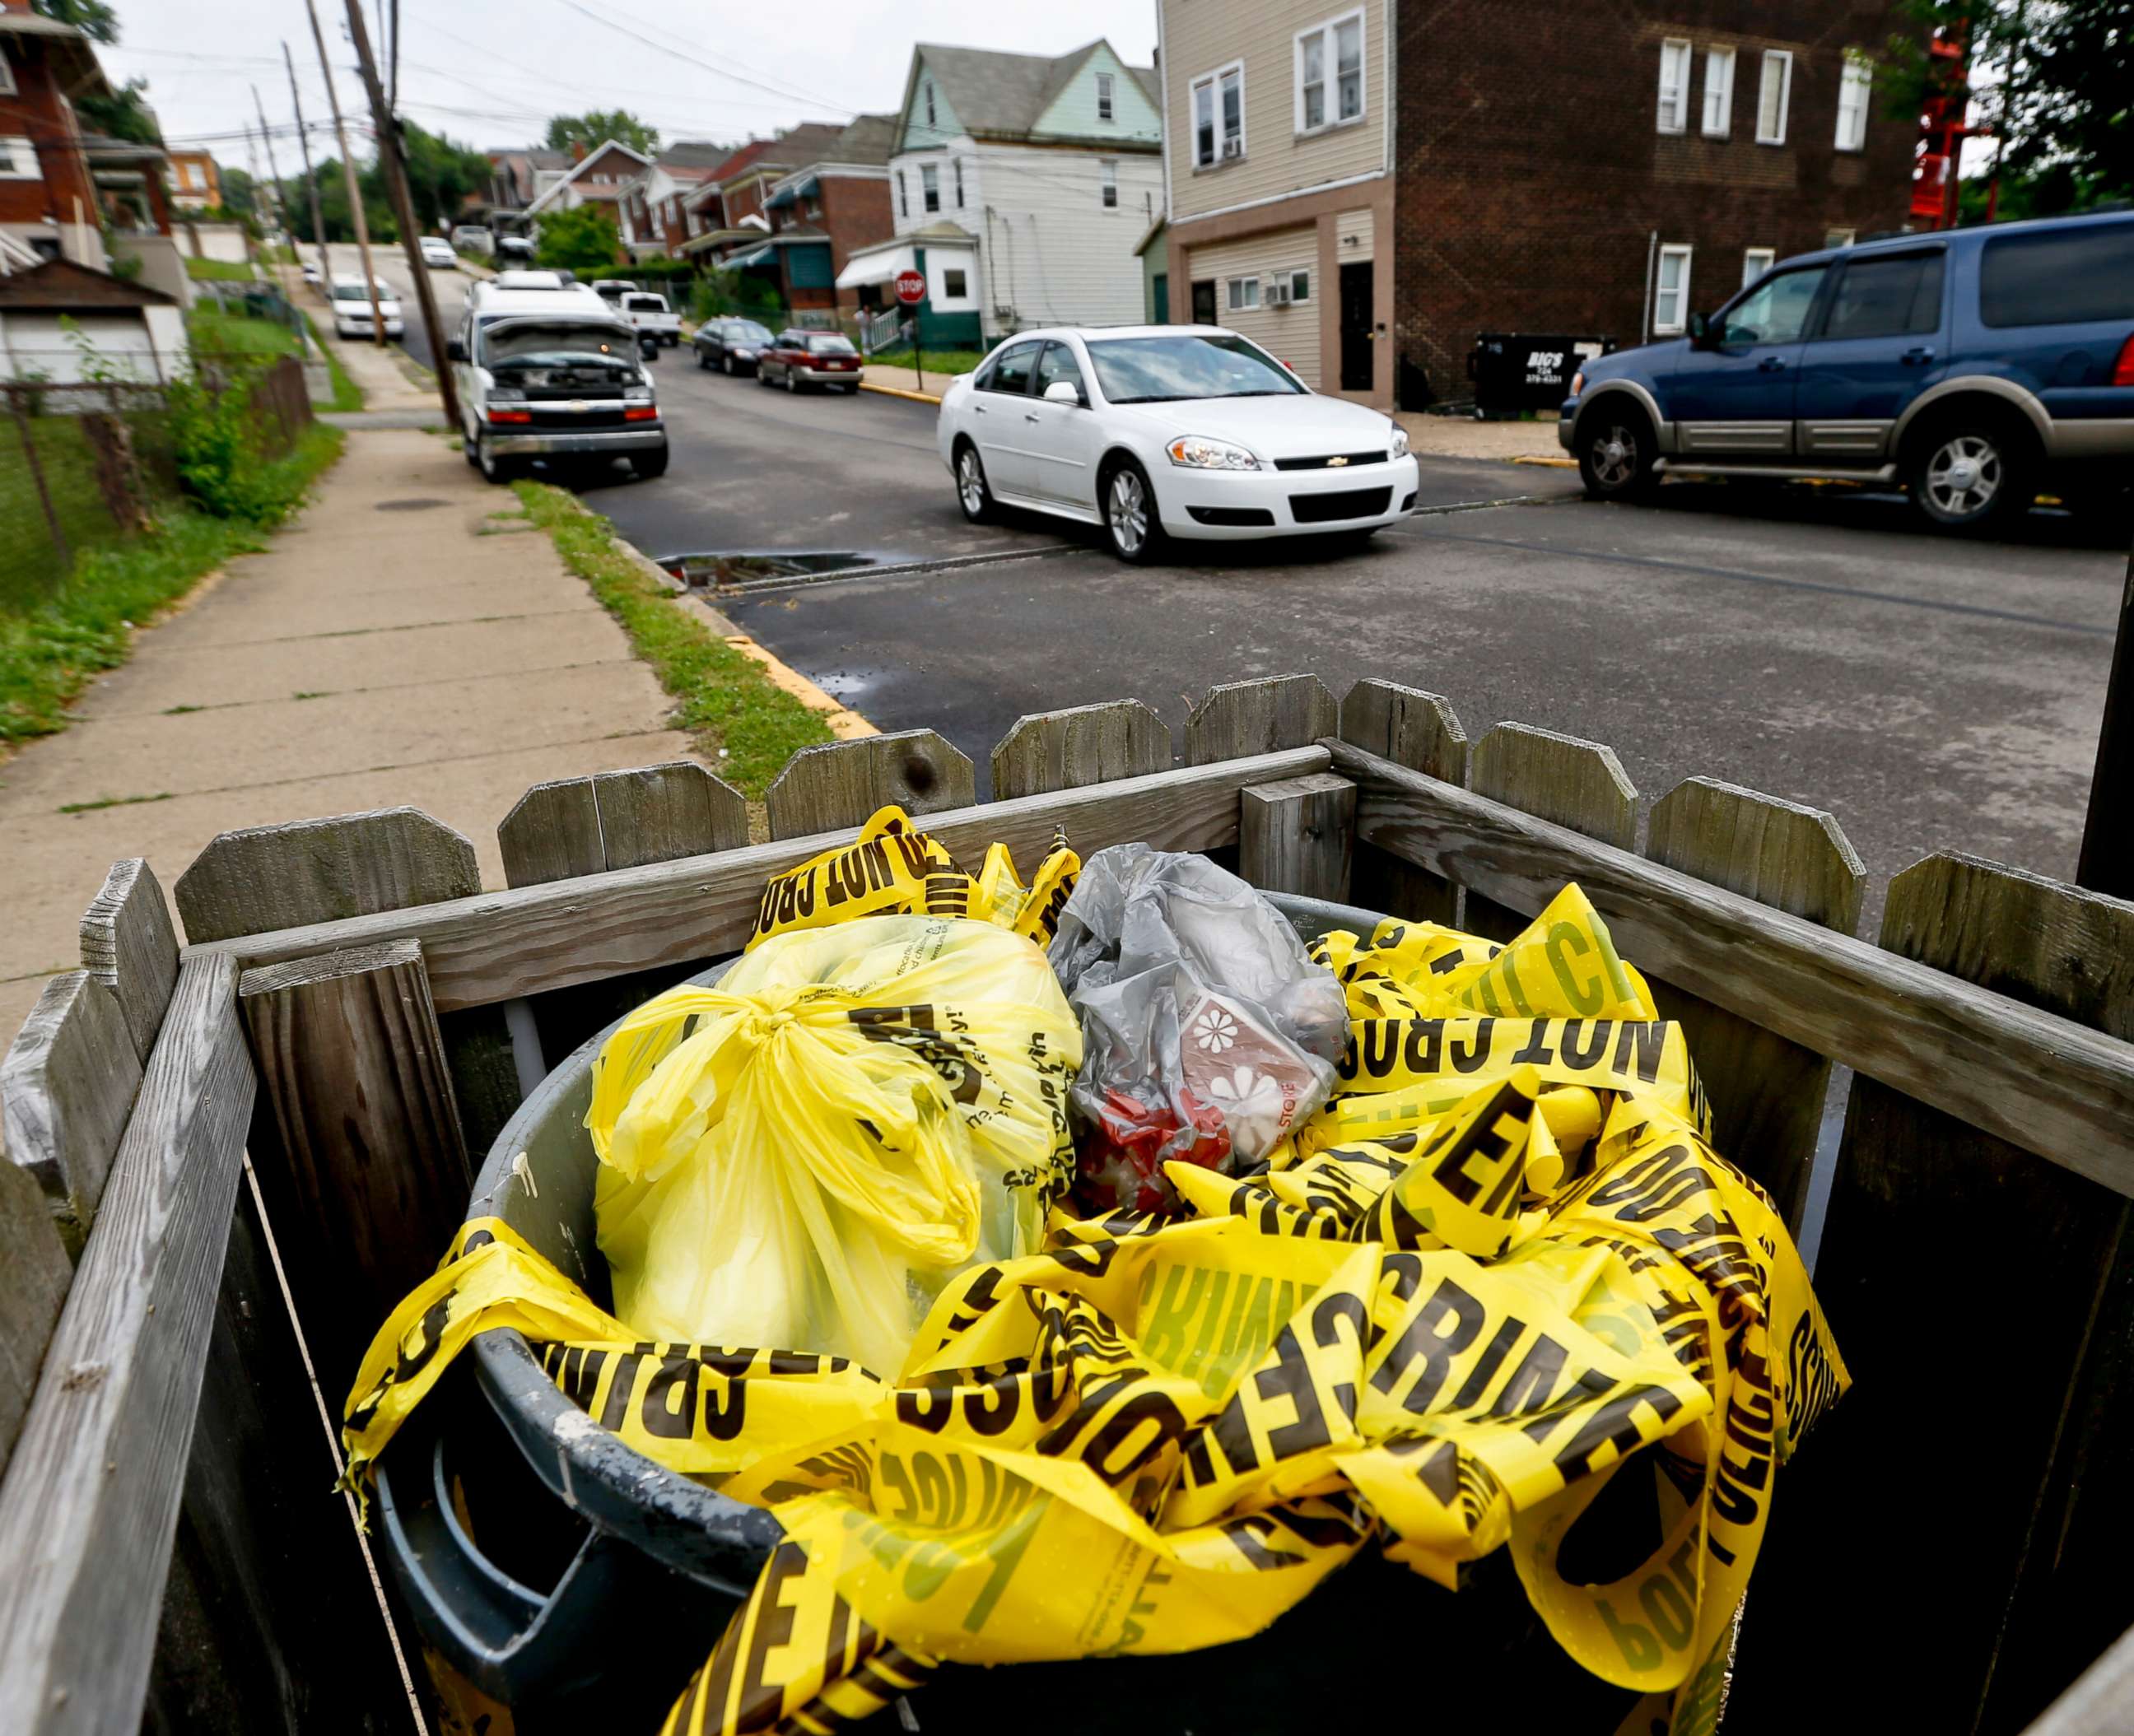 PHOTO: Crime scene tape is in a trash bin along Grandview Ave., on June 20, 2018, in East Pittsburgh, Pa.